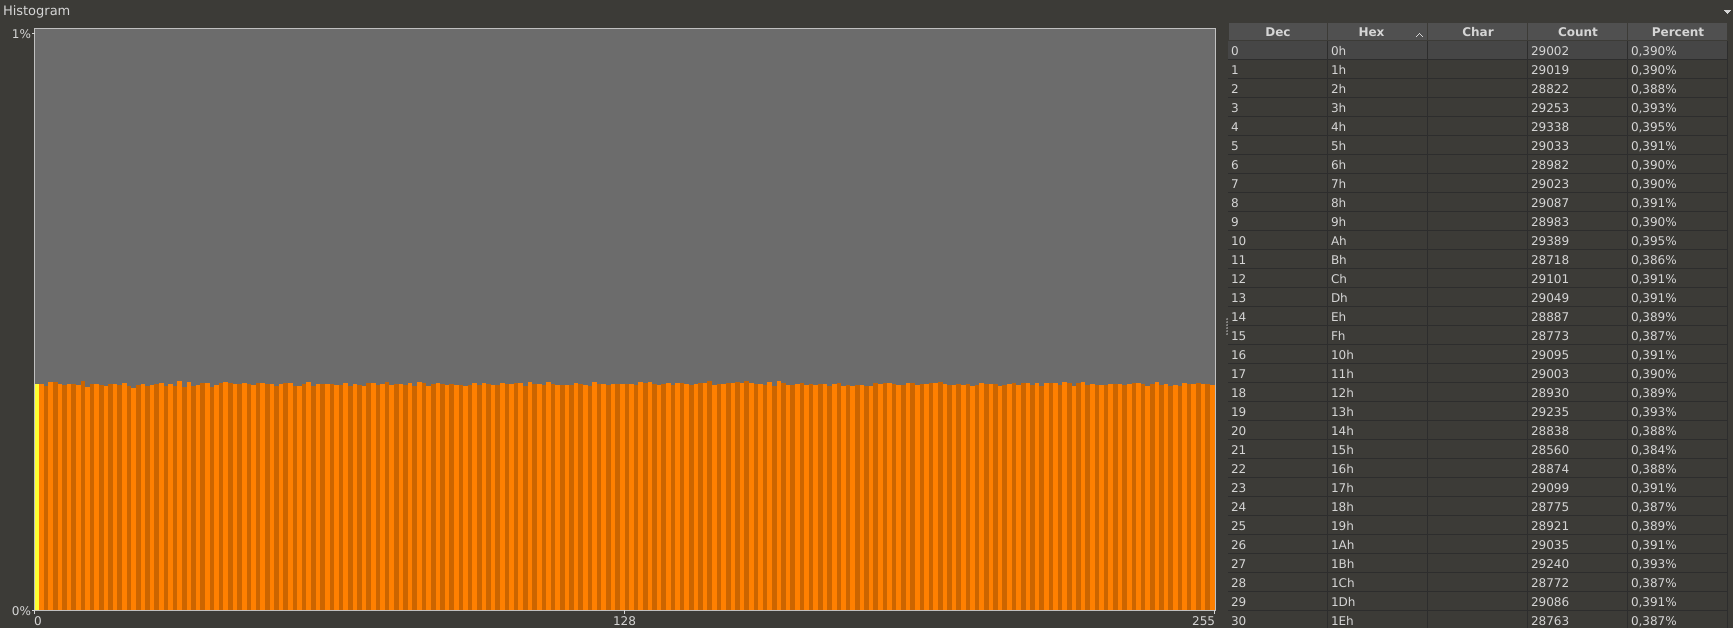 Histogram of byte number 2 to byte number 8 of all collected challenges